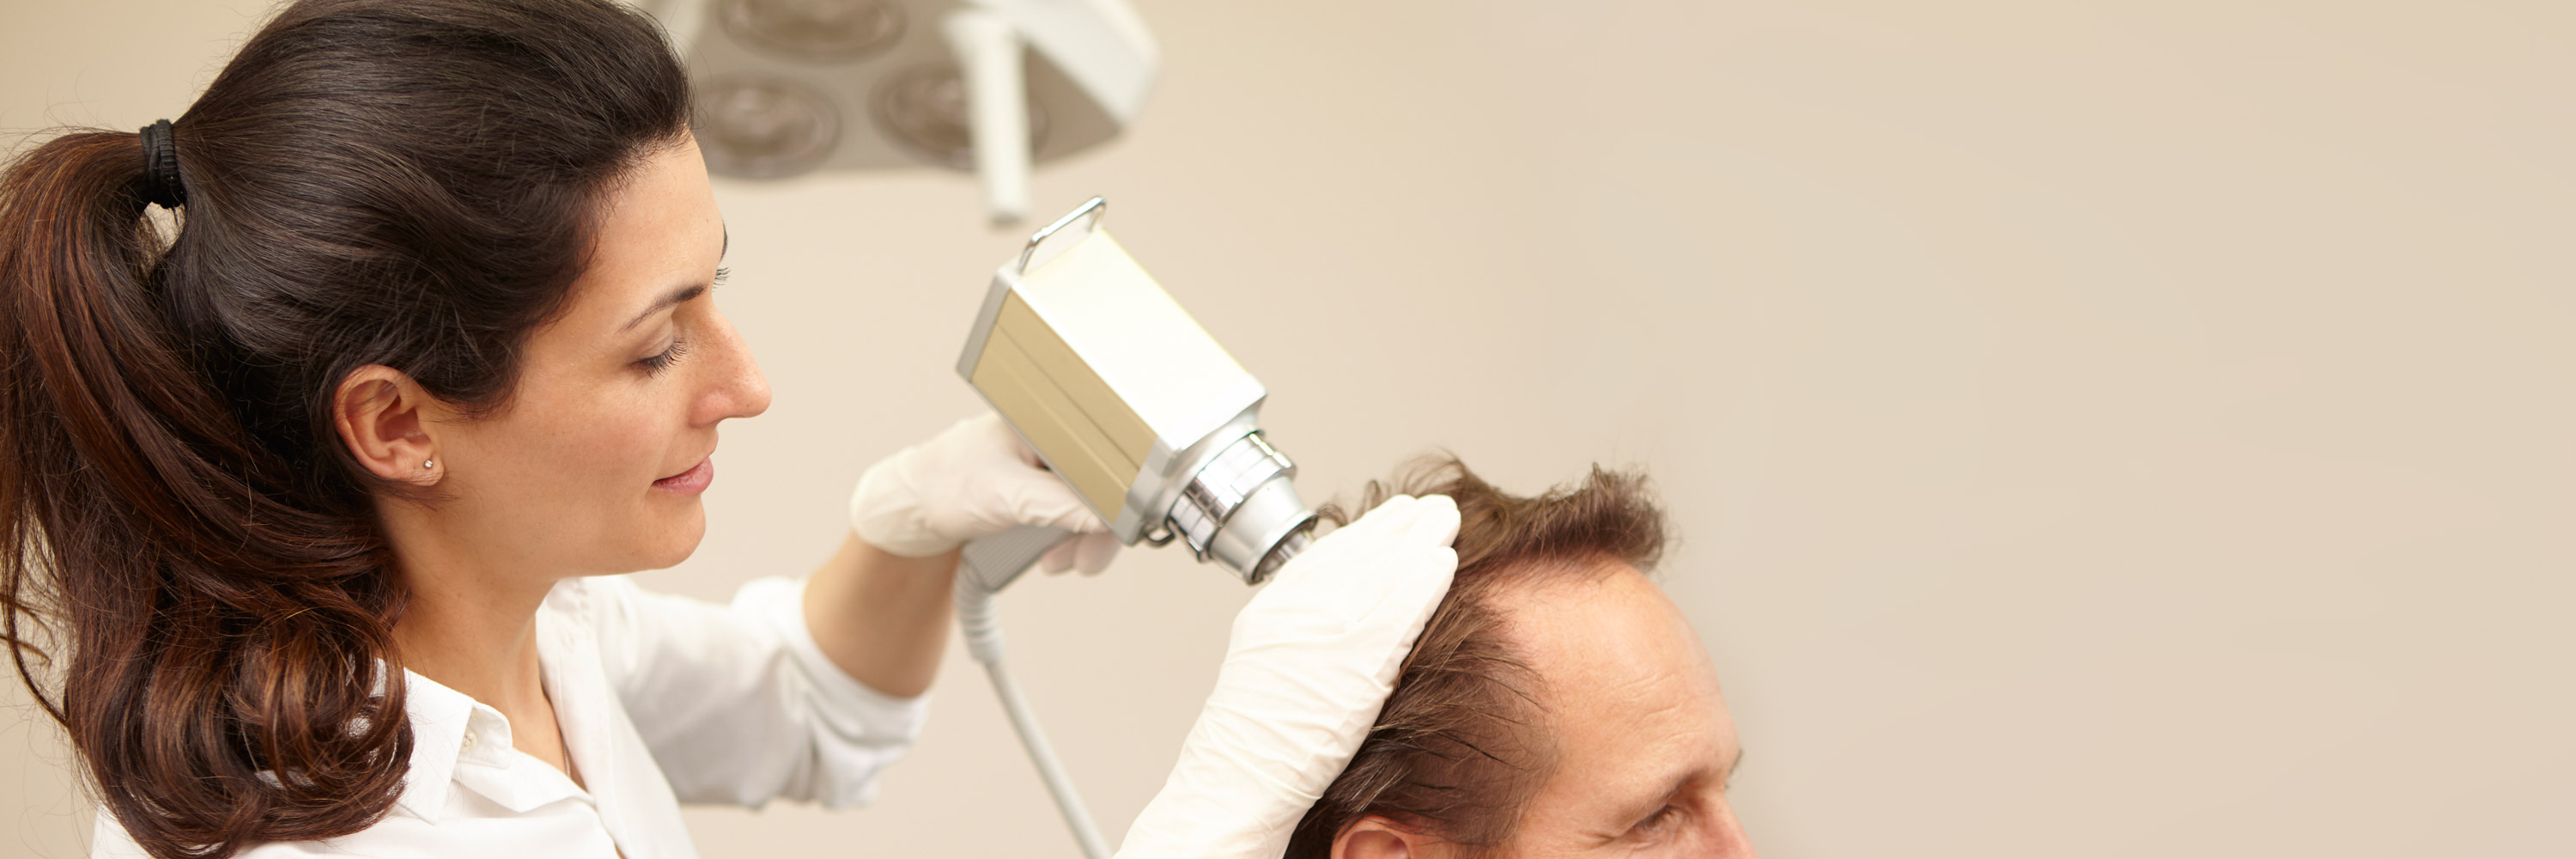 After a detailed consultation, a specialist treats a patient with the meso gun against hair loss. The hair roots on the head of a male person are stimulated to grow by the injections with the meso gun.